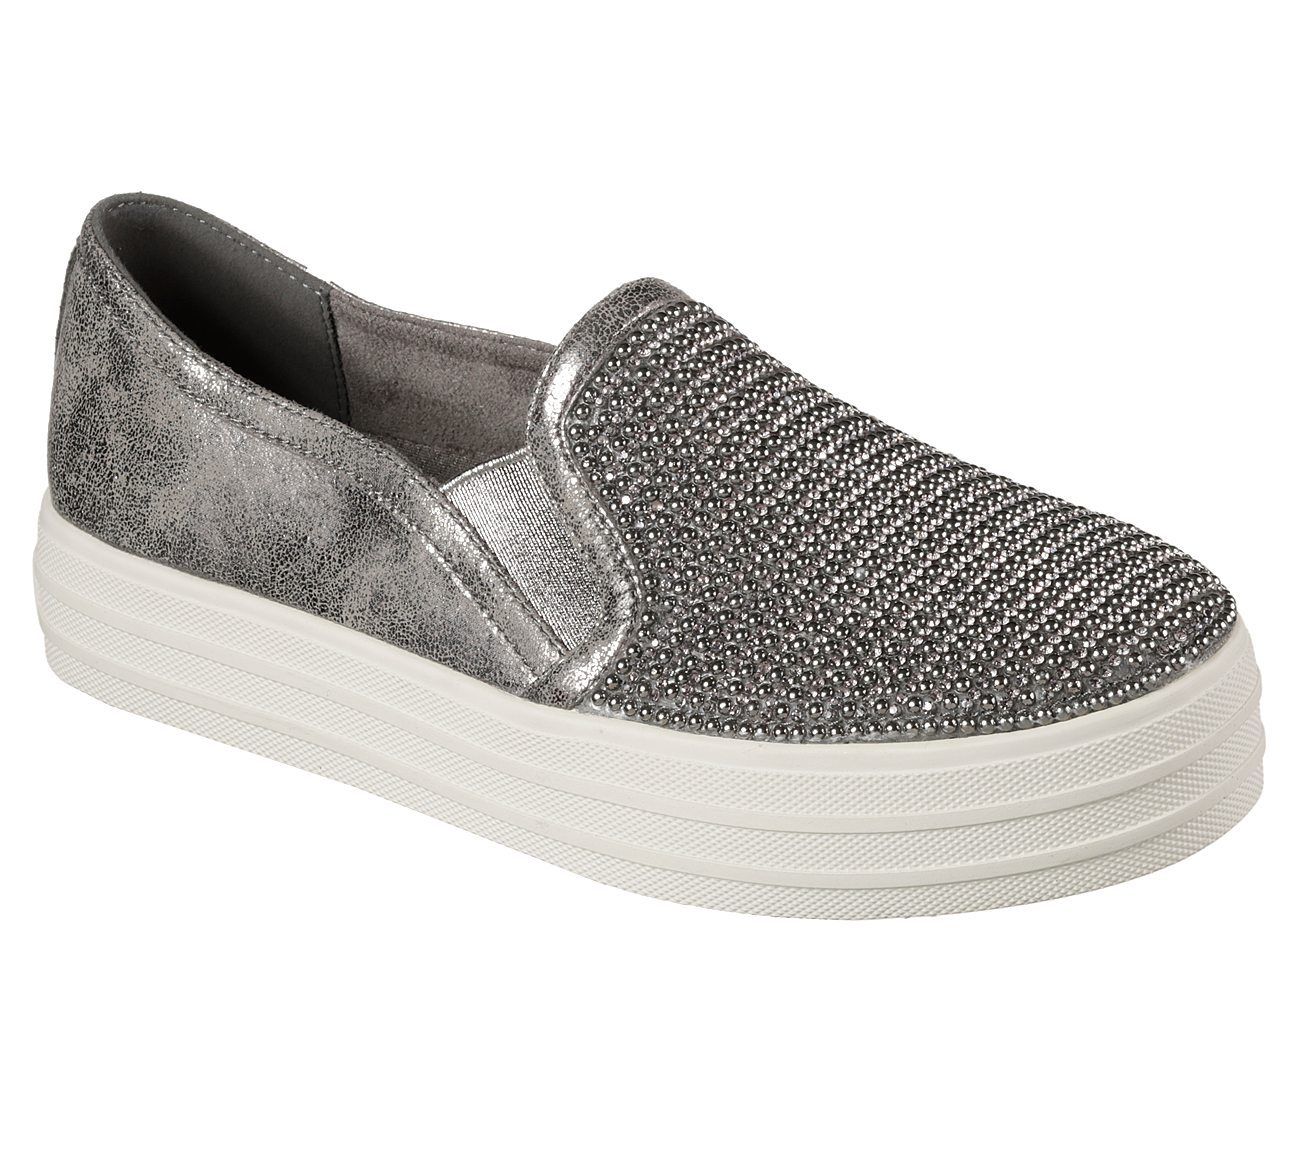 Skechers Double Up-Shiny Dancer Womens Casual Slip On Trainers | eBay